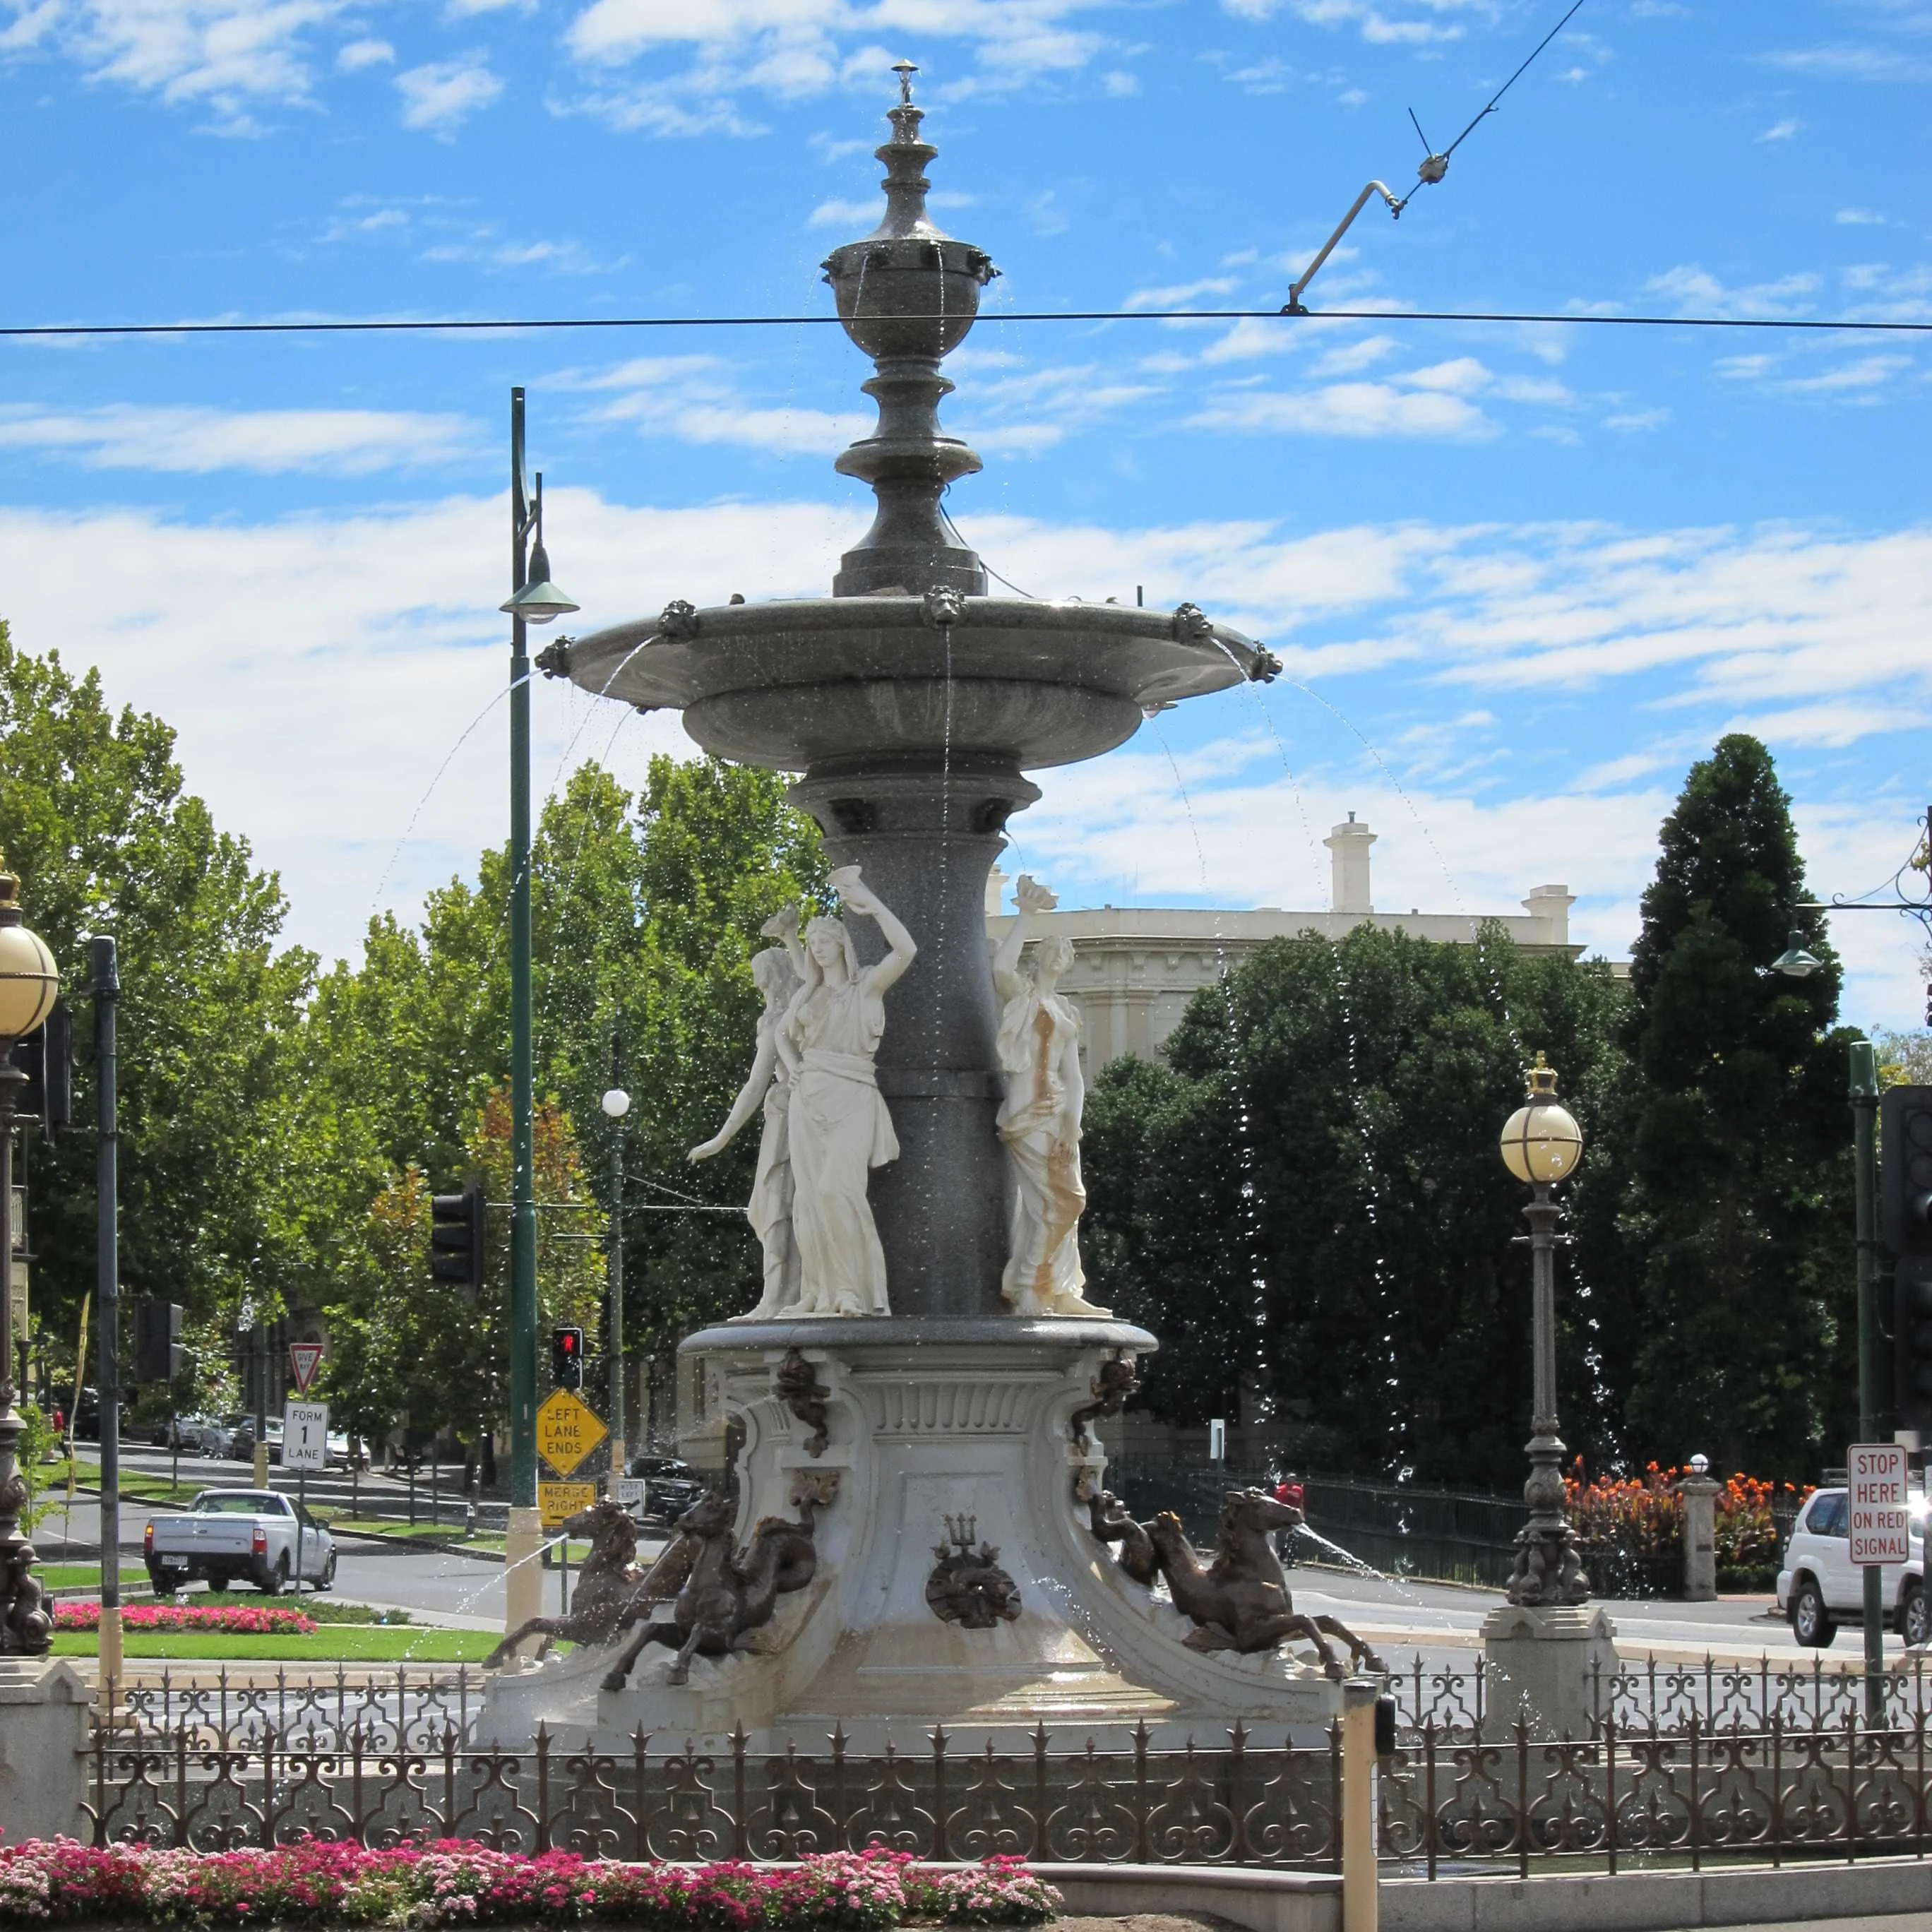 Tall fountain with white statues on the base